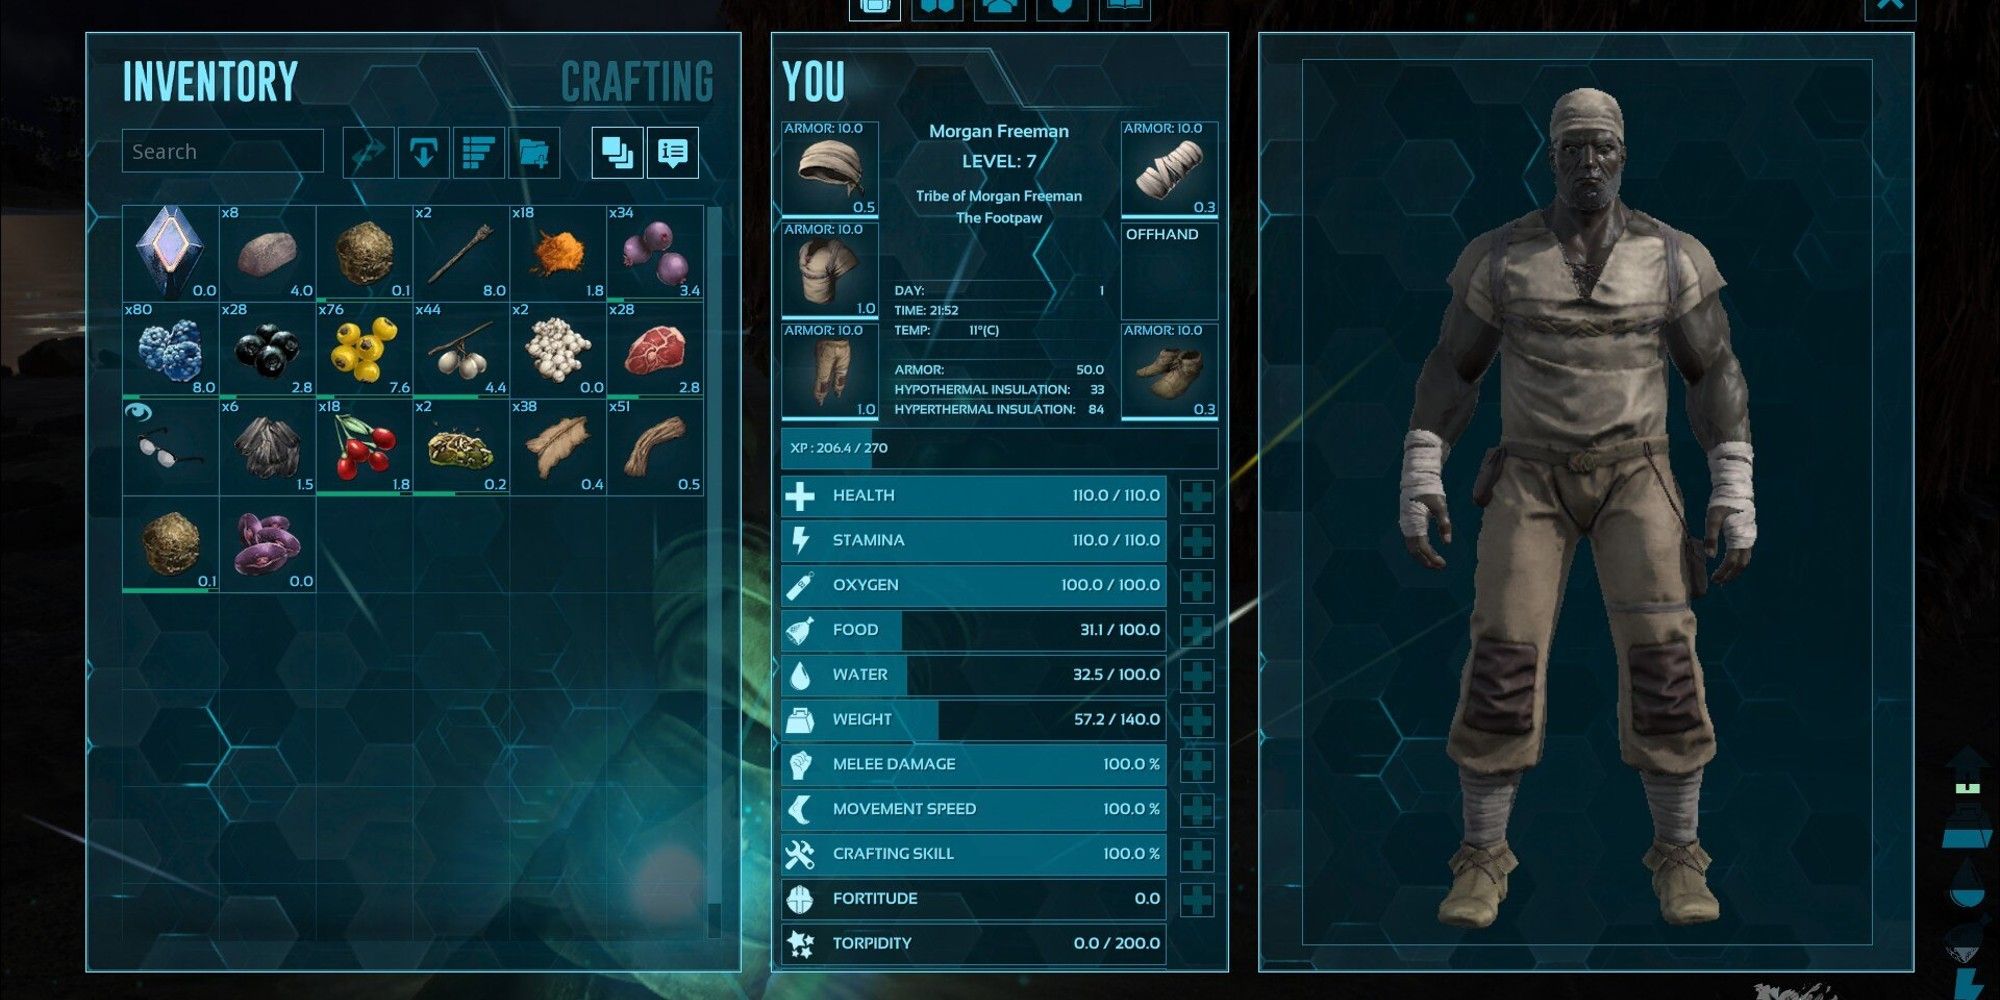 player wearing full armor shown on inventory screen